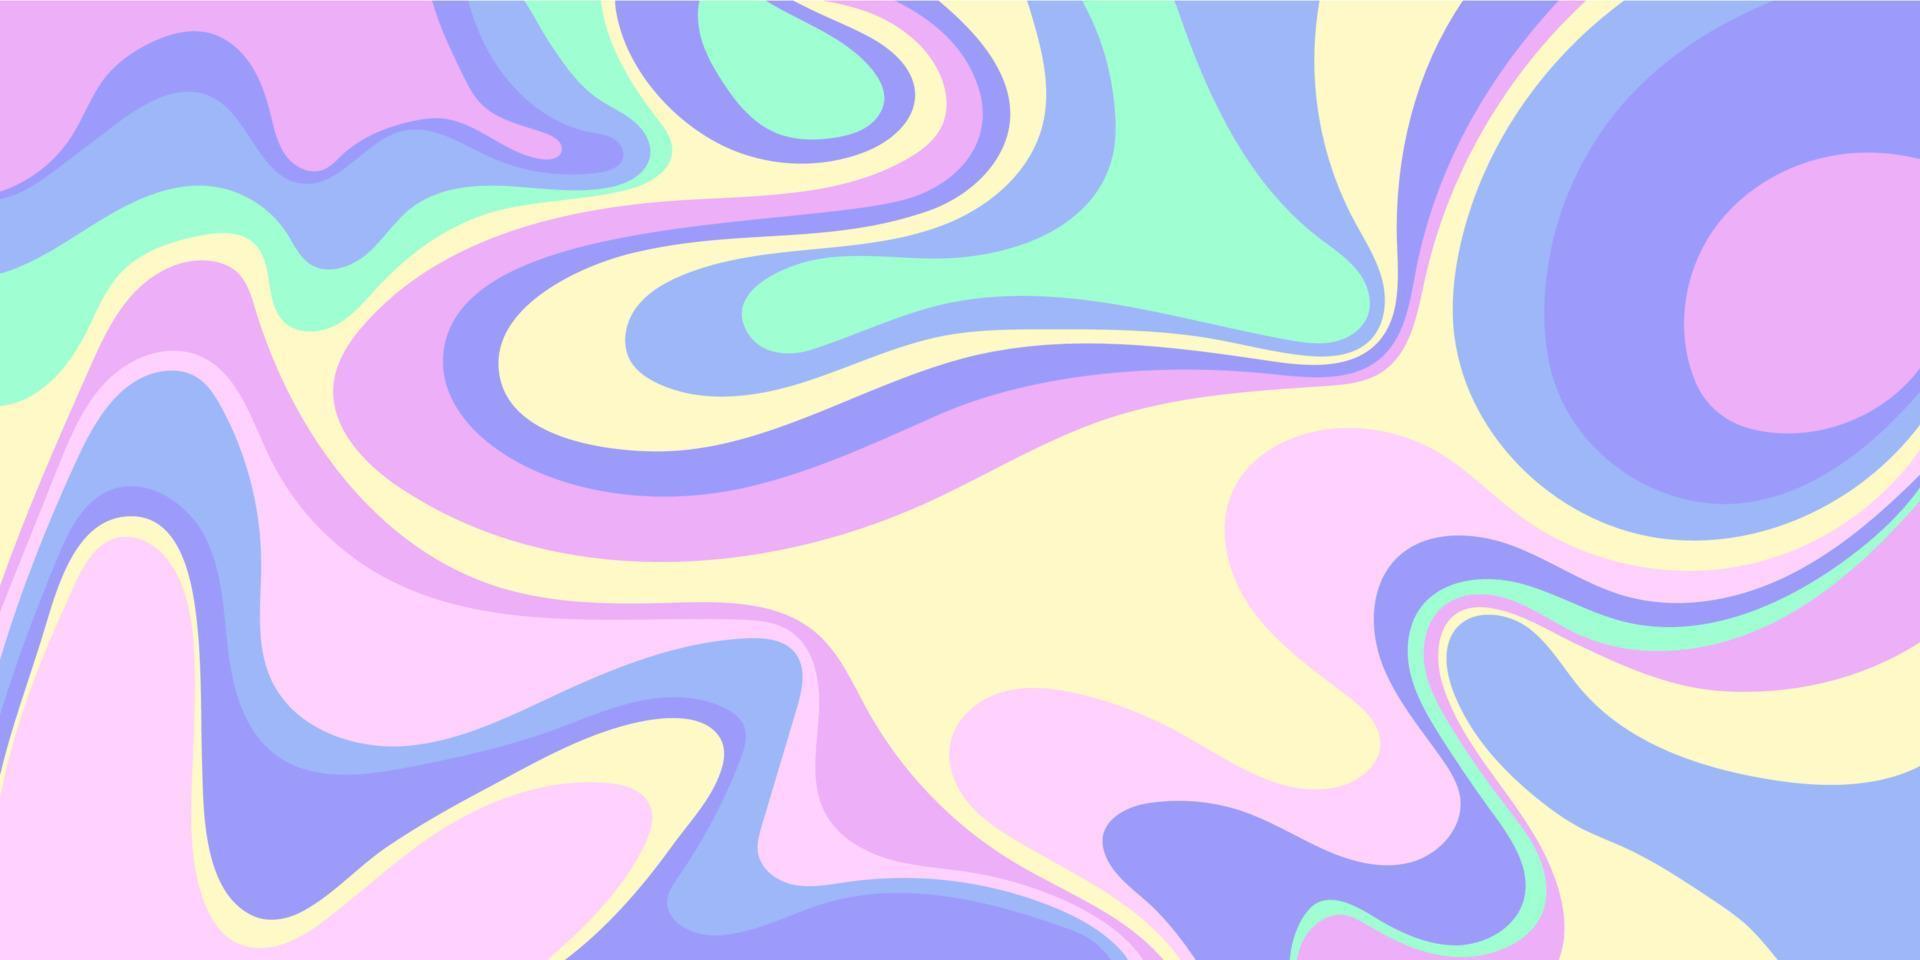 Psychedelic y2k background 2000. Vector illustration in retro aesthetic 1990 style.